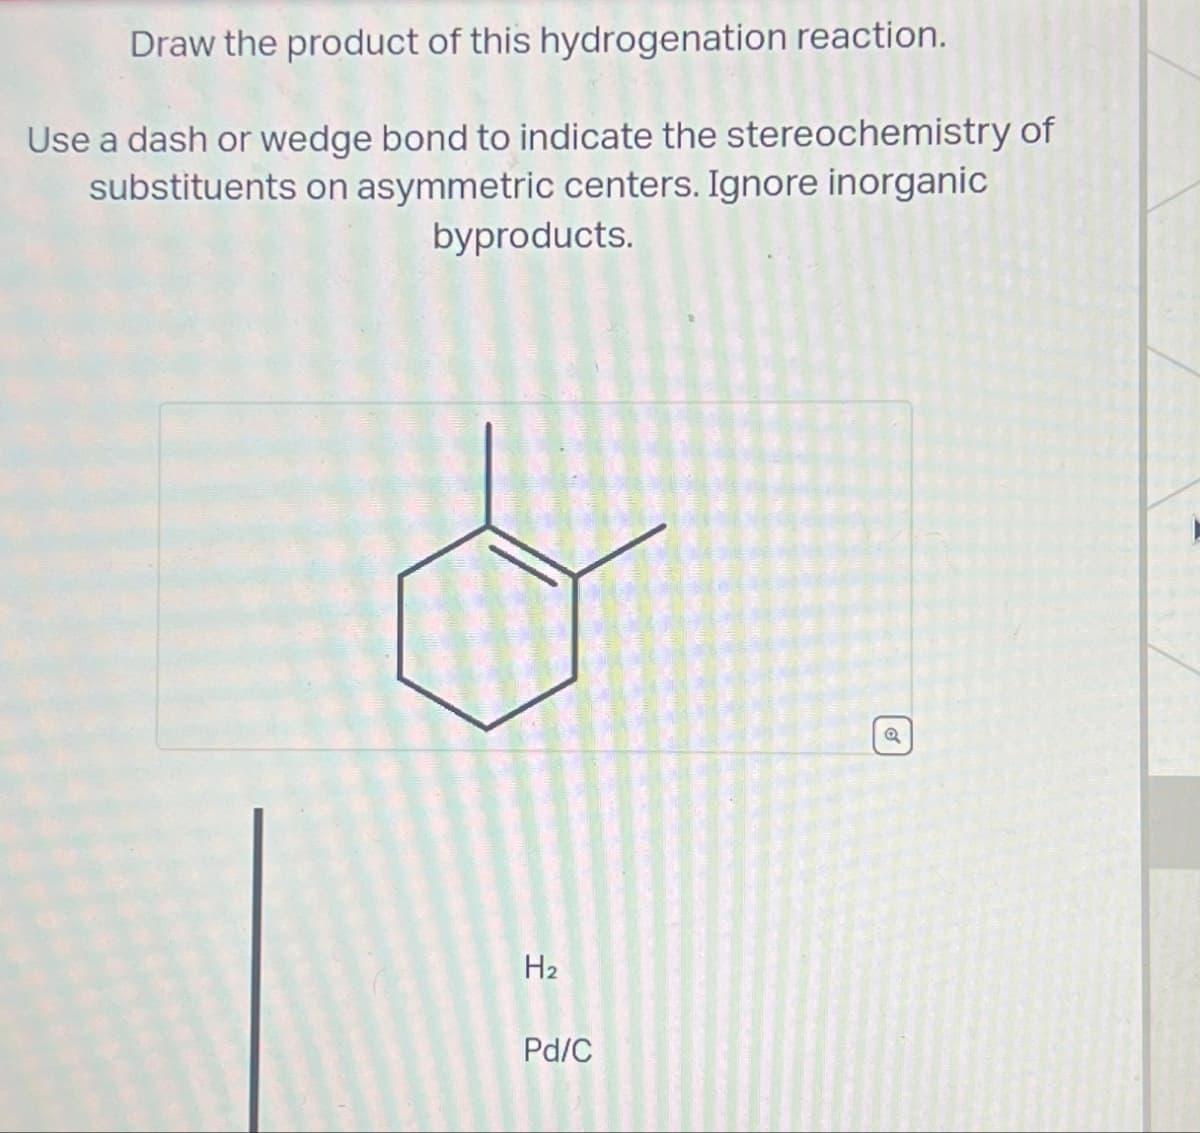 Draw the product of this hydrogenation reaction.
Use a dash or wedge bond to indicate the stereochemistry of
substituents on asymmetric centers. Ignore inorganic
byproducts.
H2
Pd/C